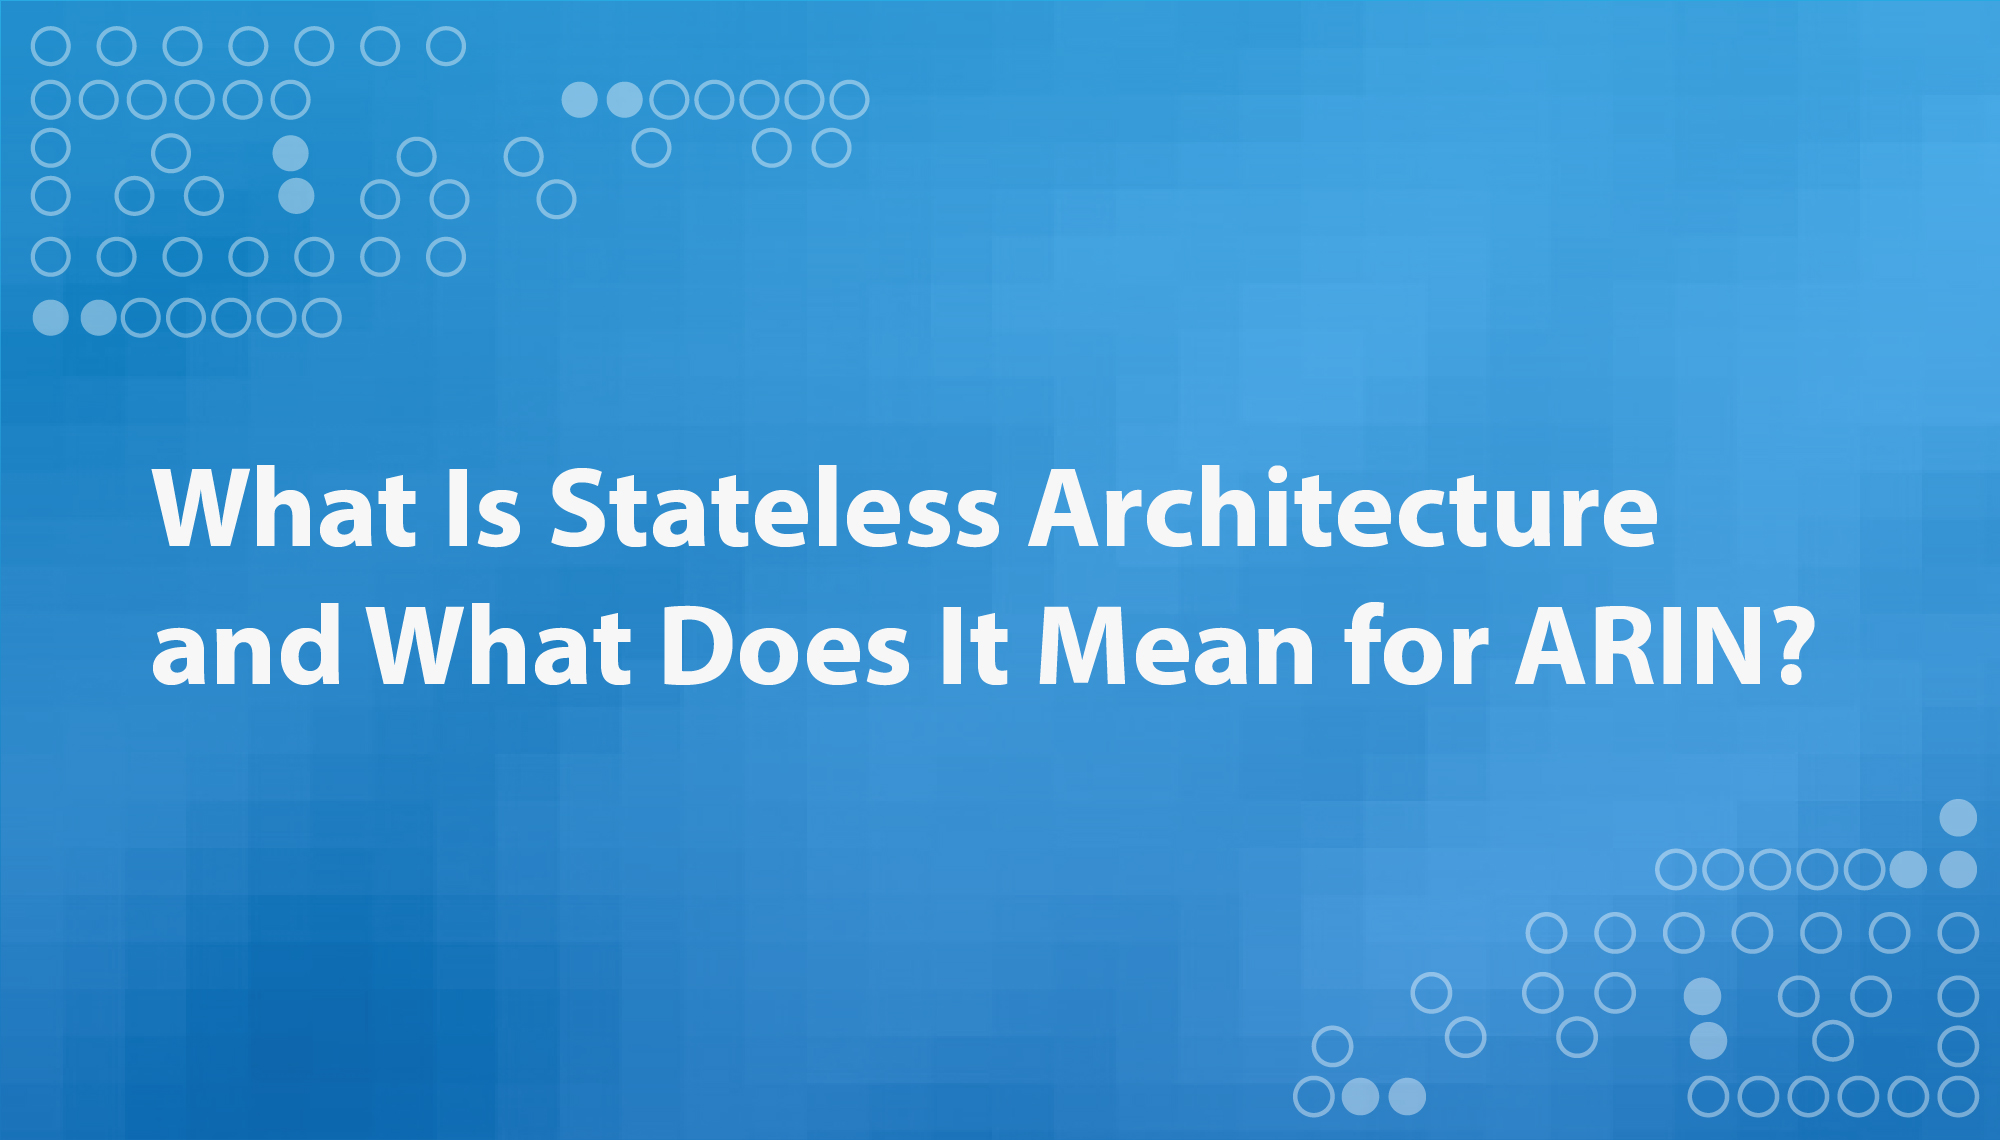 What Is Stateless Architecture and What Does It Mean for ARIN?